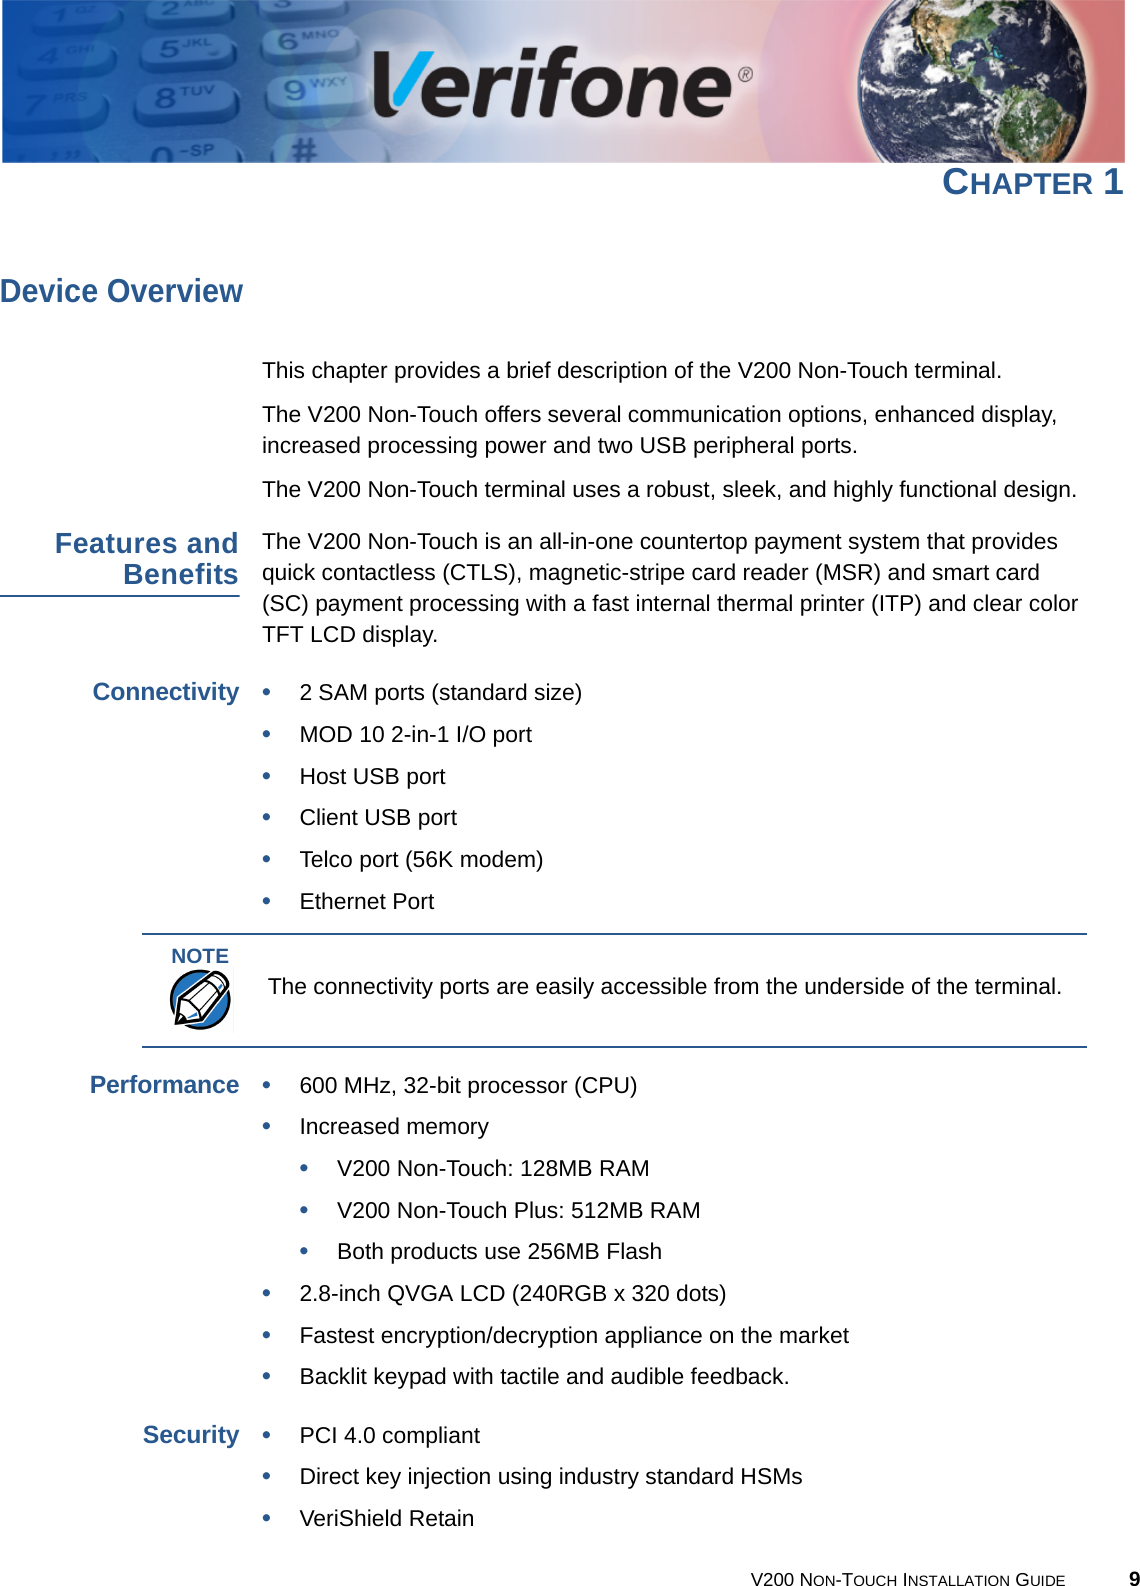 V200 NON-TOUCH INSTALLATION GUIDE 9CHAPTER 1Device OverviewThis chapter provides a brief description of the V200 Non-Touch terminal.The V200 Non-Touch offers several communication options, enhanced display, increased processing power and two USB peripheral ports.The V200 Non-Touch terminal uses a robust, sleek, and highly functional design.Features andBenefitsThe V200 Non-Touch is an all-in-one countertop payment system that provides quick contactless (CTLS), magnetic-stripe card reader (MSR) and smart card (SC) payment processing with a fast internal thermal printer (ITP) and clear color TFT LCD display.Connectivity•2 SAM ports (standard size)•MOD 10 2-in-1 I/O port•Host USB port•Client USB port•Telco port (56K modem)•Ethernet PortPerformance•600 MHz, 32-bit processor (CPU)•Increased memory •V200 Non-Touch: 128MB RAM•V200 Non-Touch Plus: 512MB RAM•Both products use 256MB Flash•2.8-inch QVGA LCD (240RGB x 320 dots)•Fastest encryption/decryption appliance on the market•Backlit keypad with tactile and audible feedback.Security•PCI 4.0 compliant•Direct key injection using industry standard HSMs•VeriShield RetainNOTEThe connectivity ports are easily accessible from the underside of the terminal.